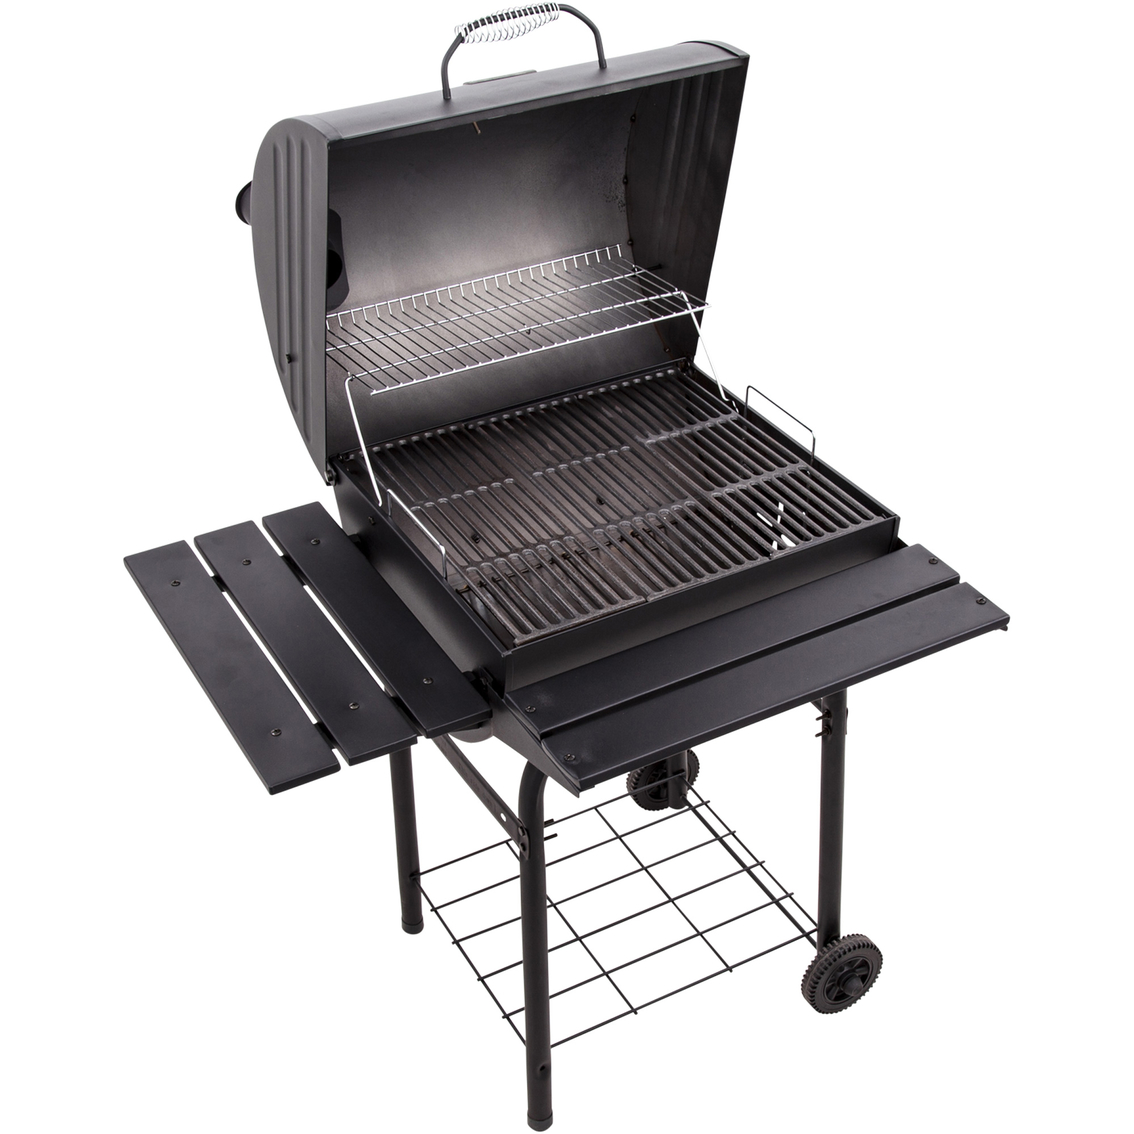 Char-Broil 625 Charcoal Grill - Image 3 of 5